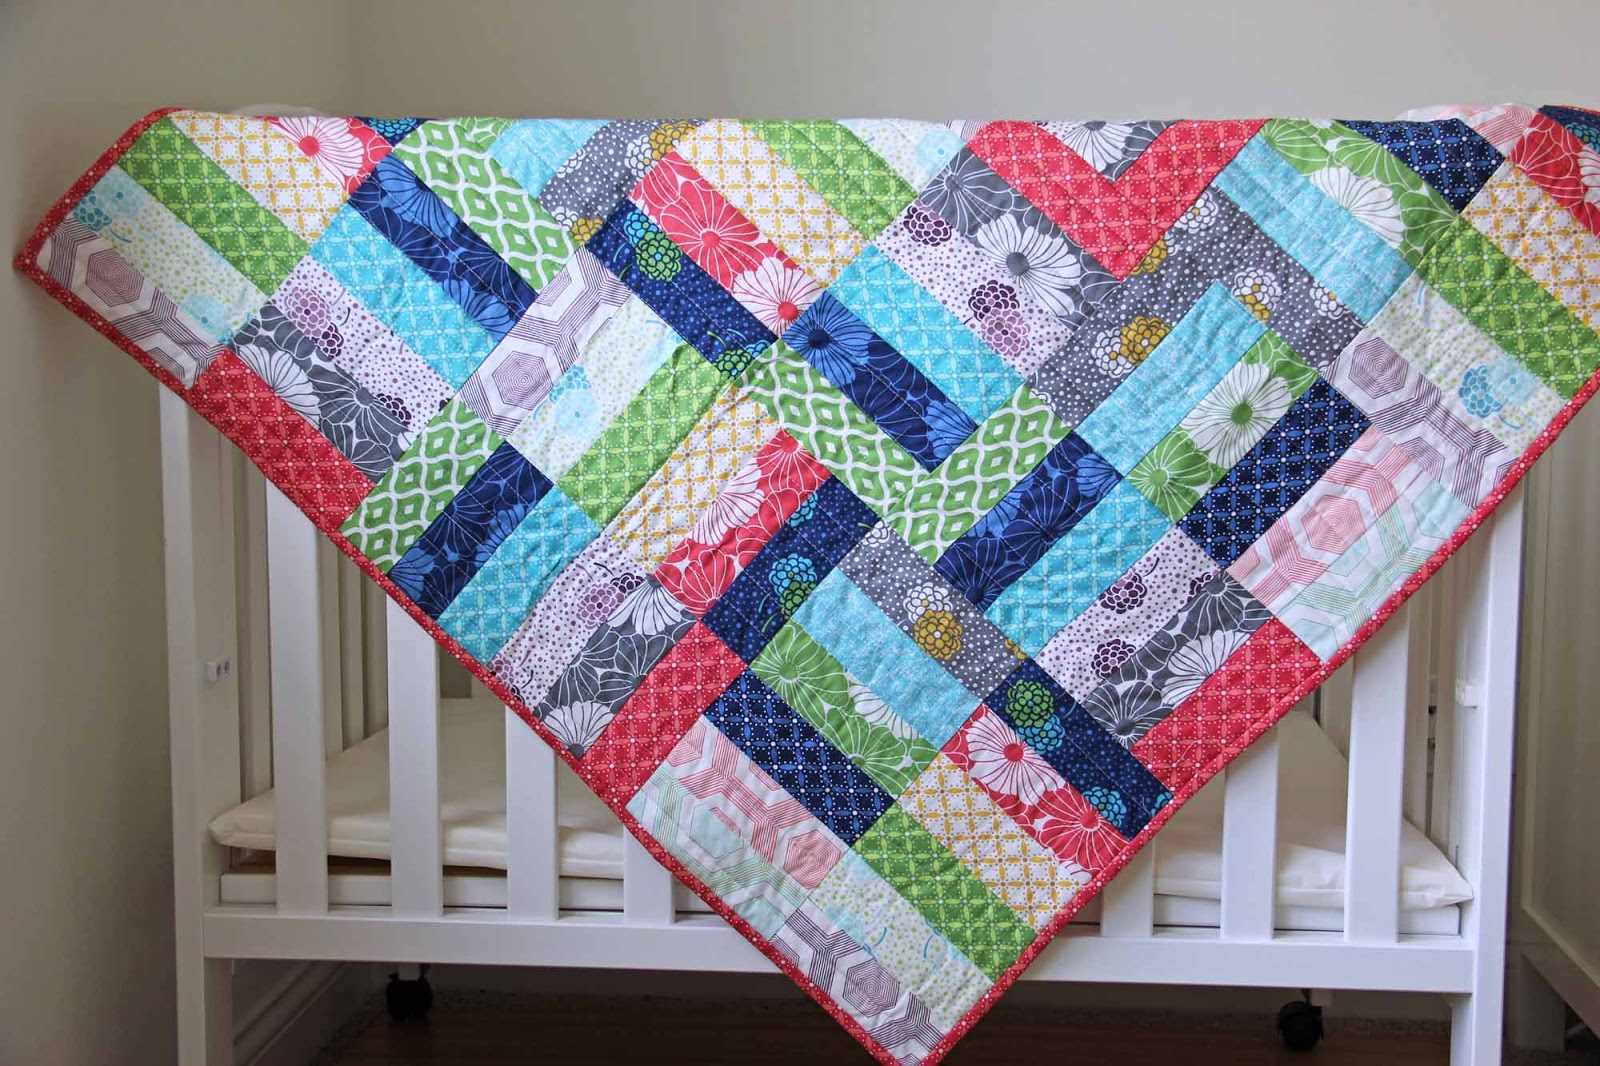 v-and-co-v-and-co-jelly-roll-jam-quilt-free-pattern-and-video-tutorial